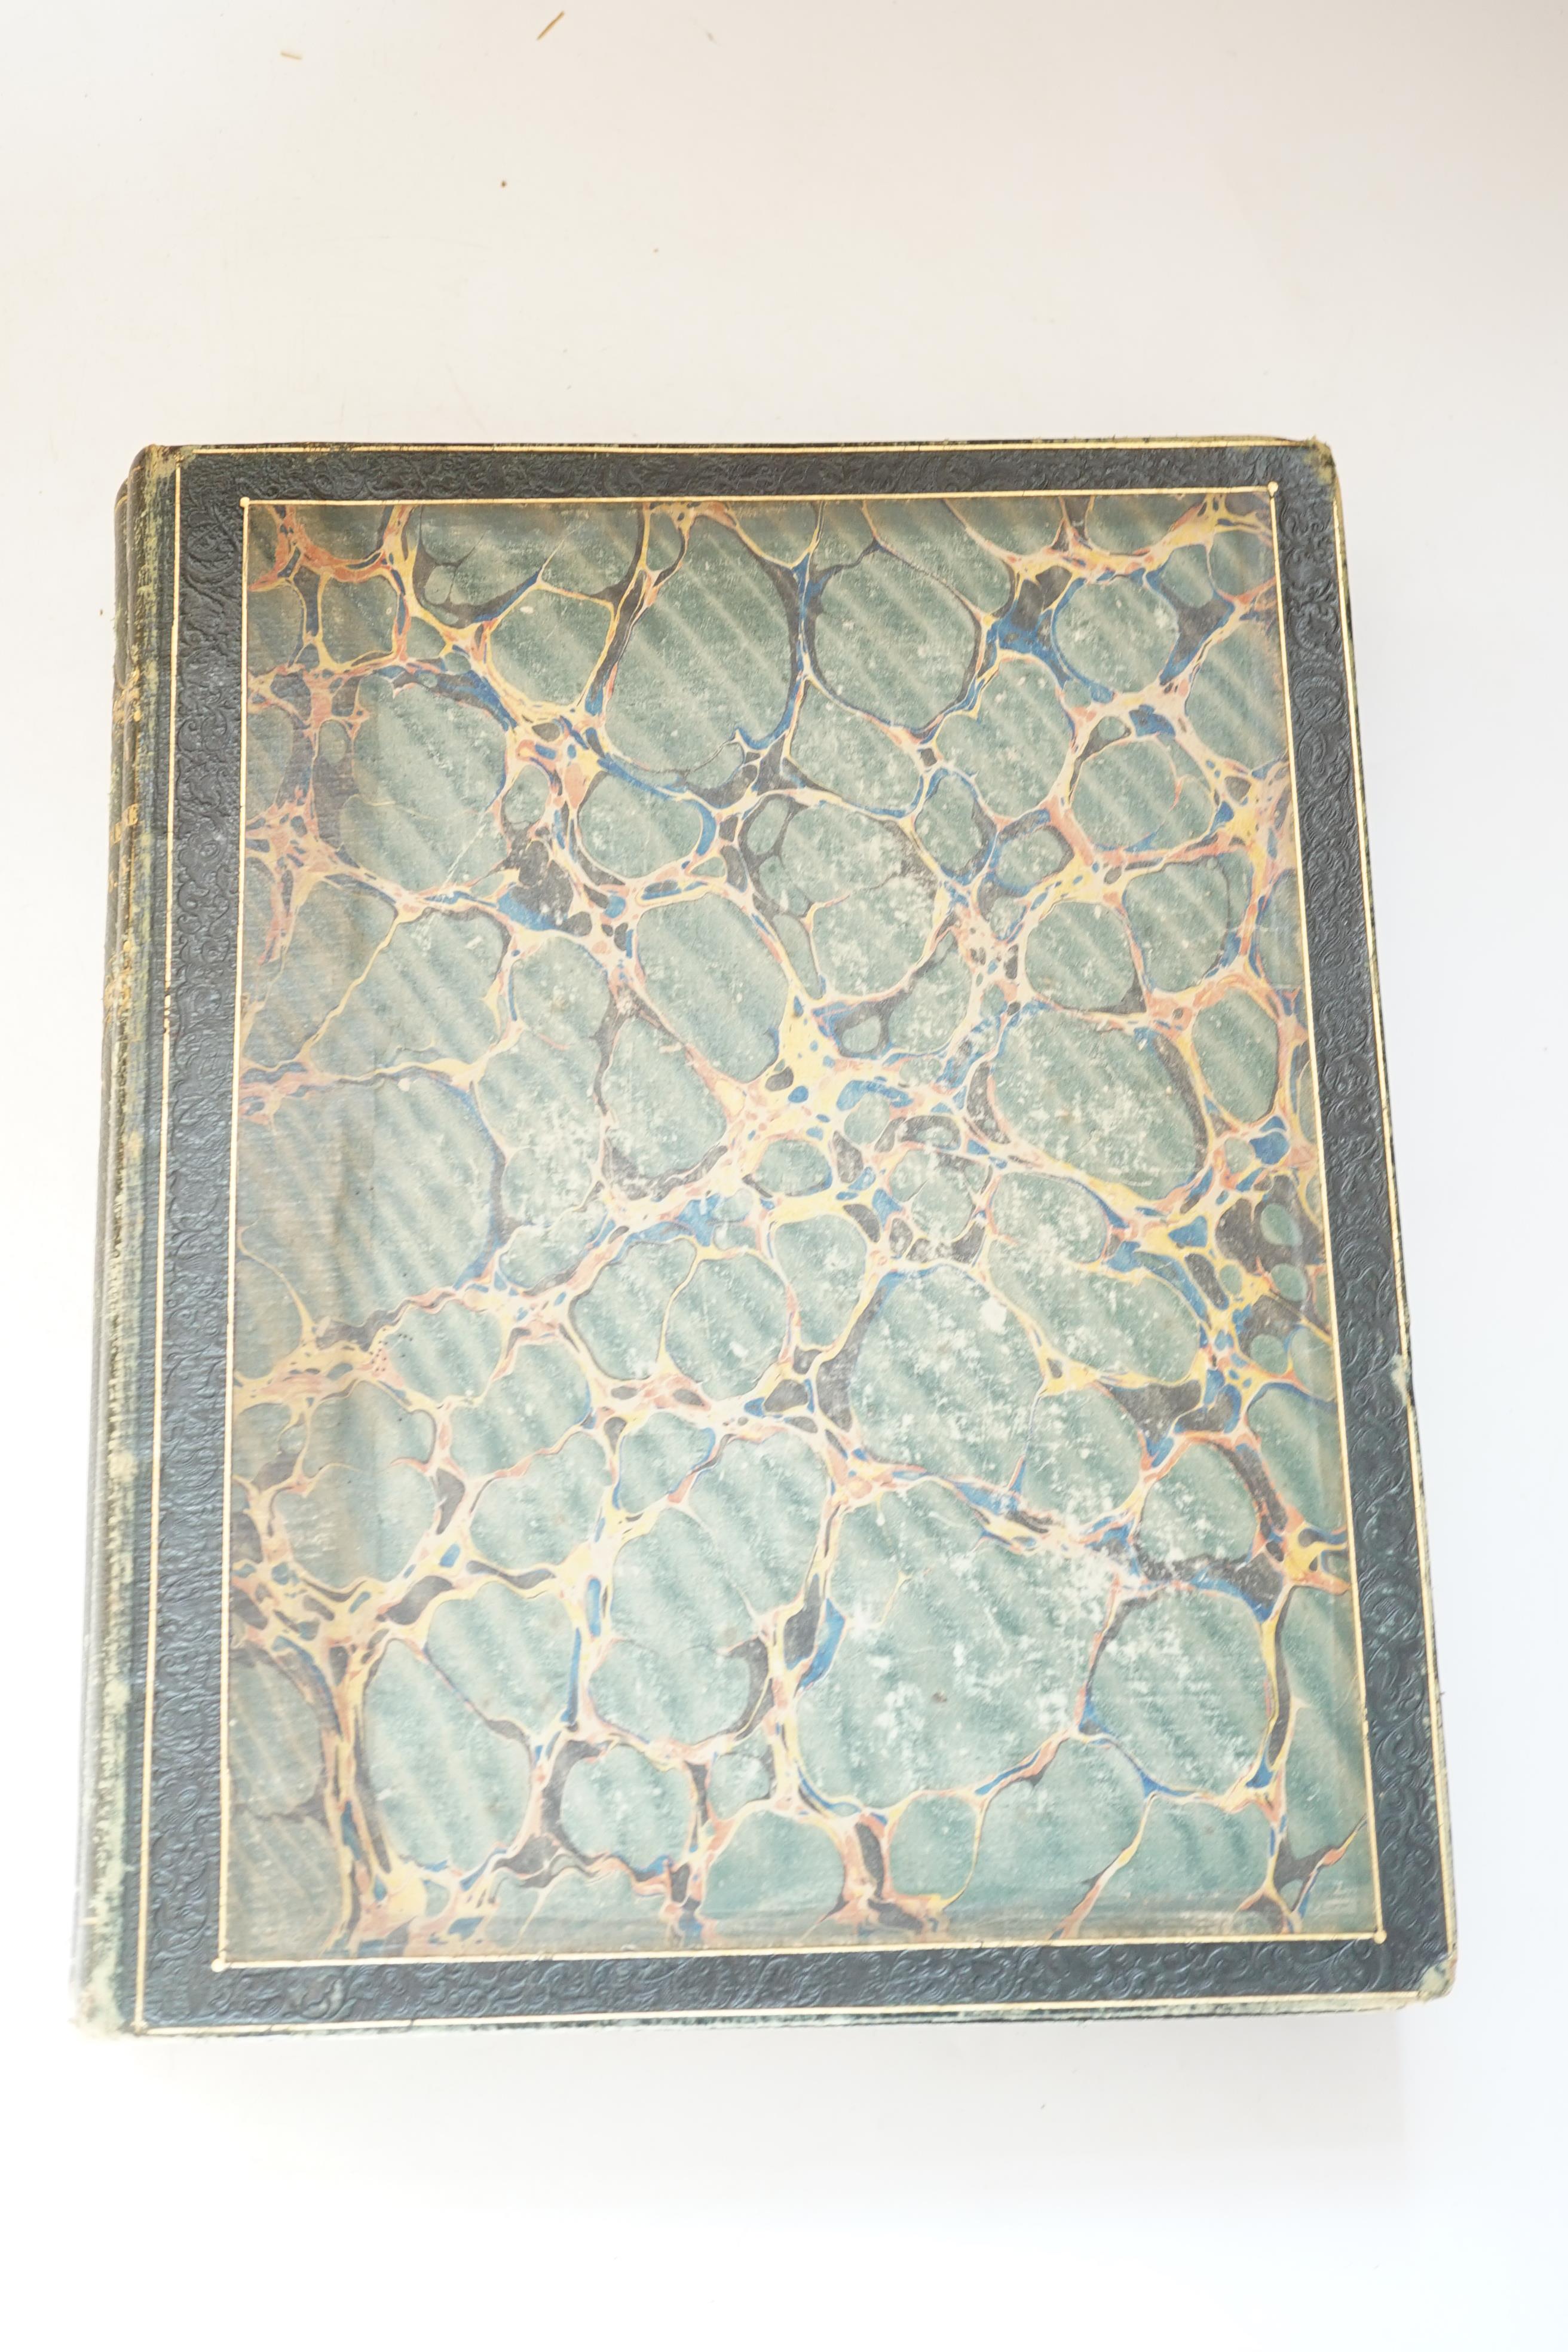 Phillips, John - Illustrations of the The Geology of Yorkshire, 2 vols, 4to, green blindstamped spine and cover borders with marbled boards, with plates and maps, some coloured, York, 1829 and London, 1836